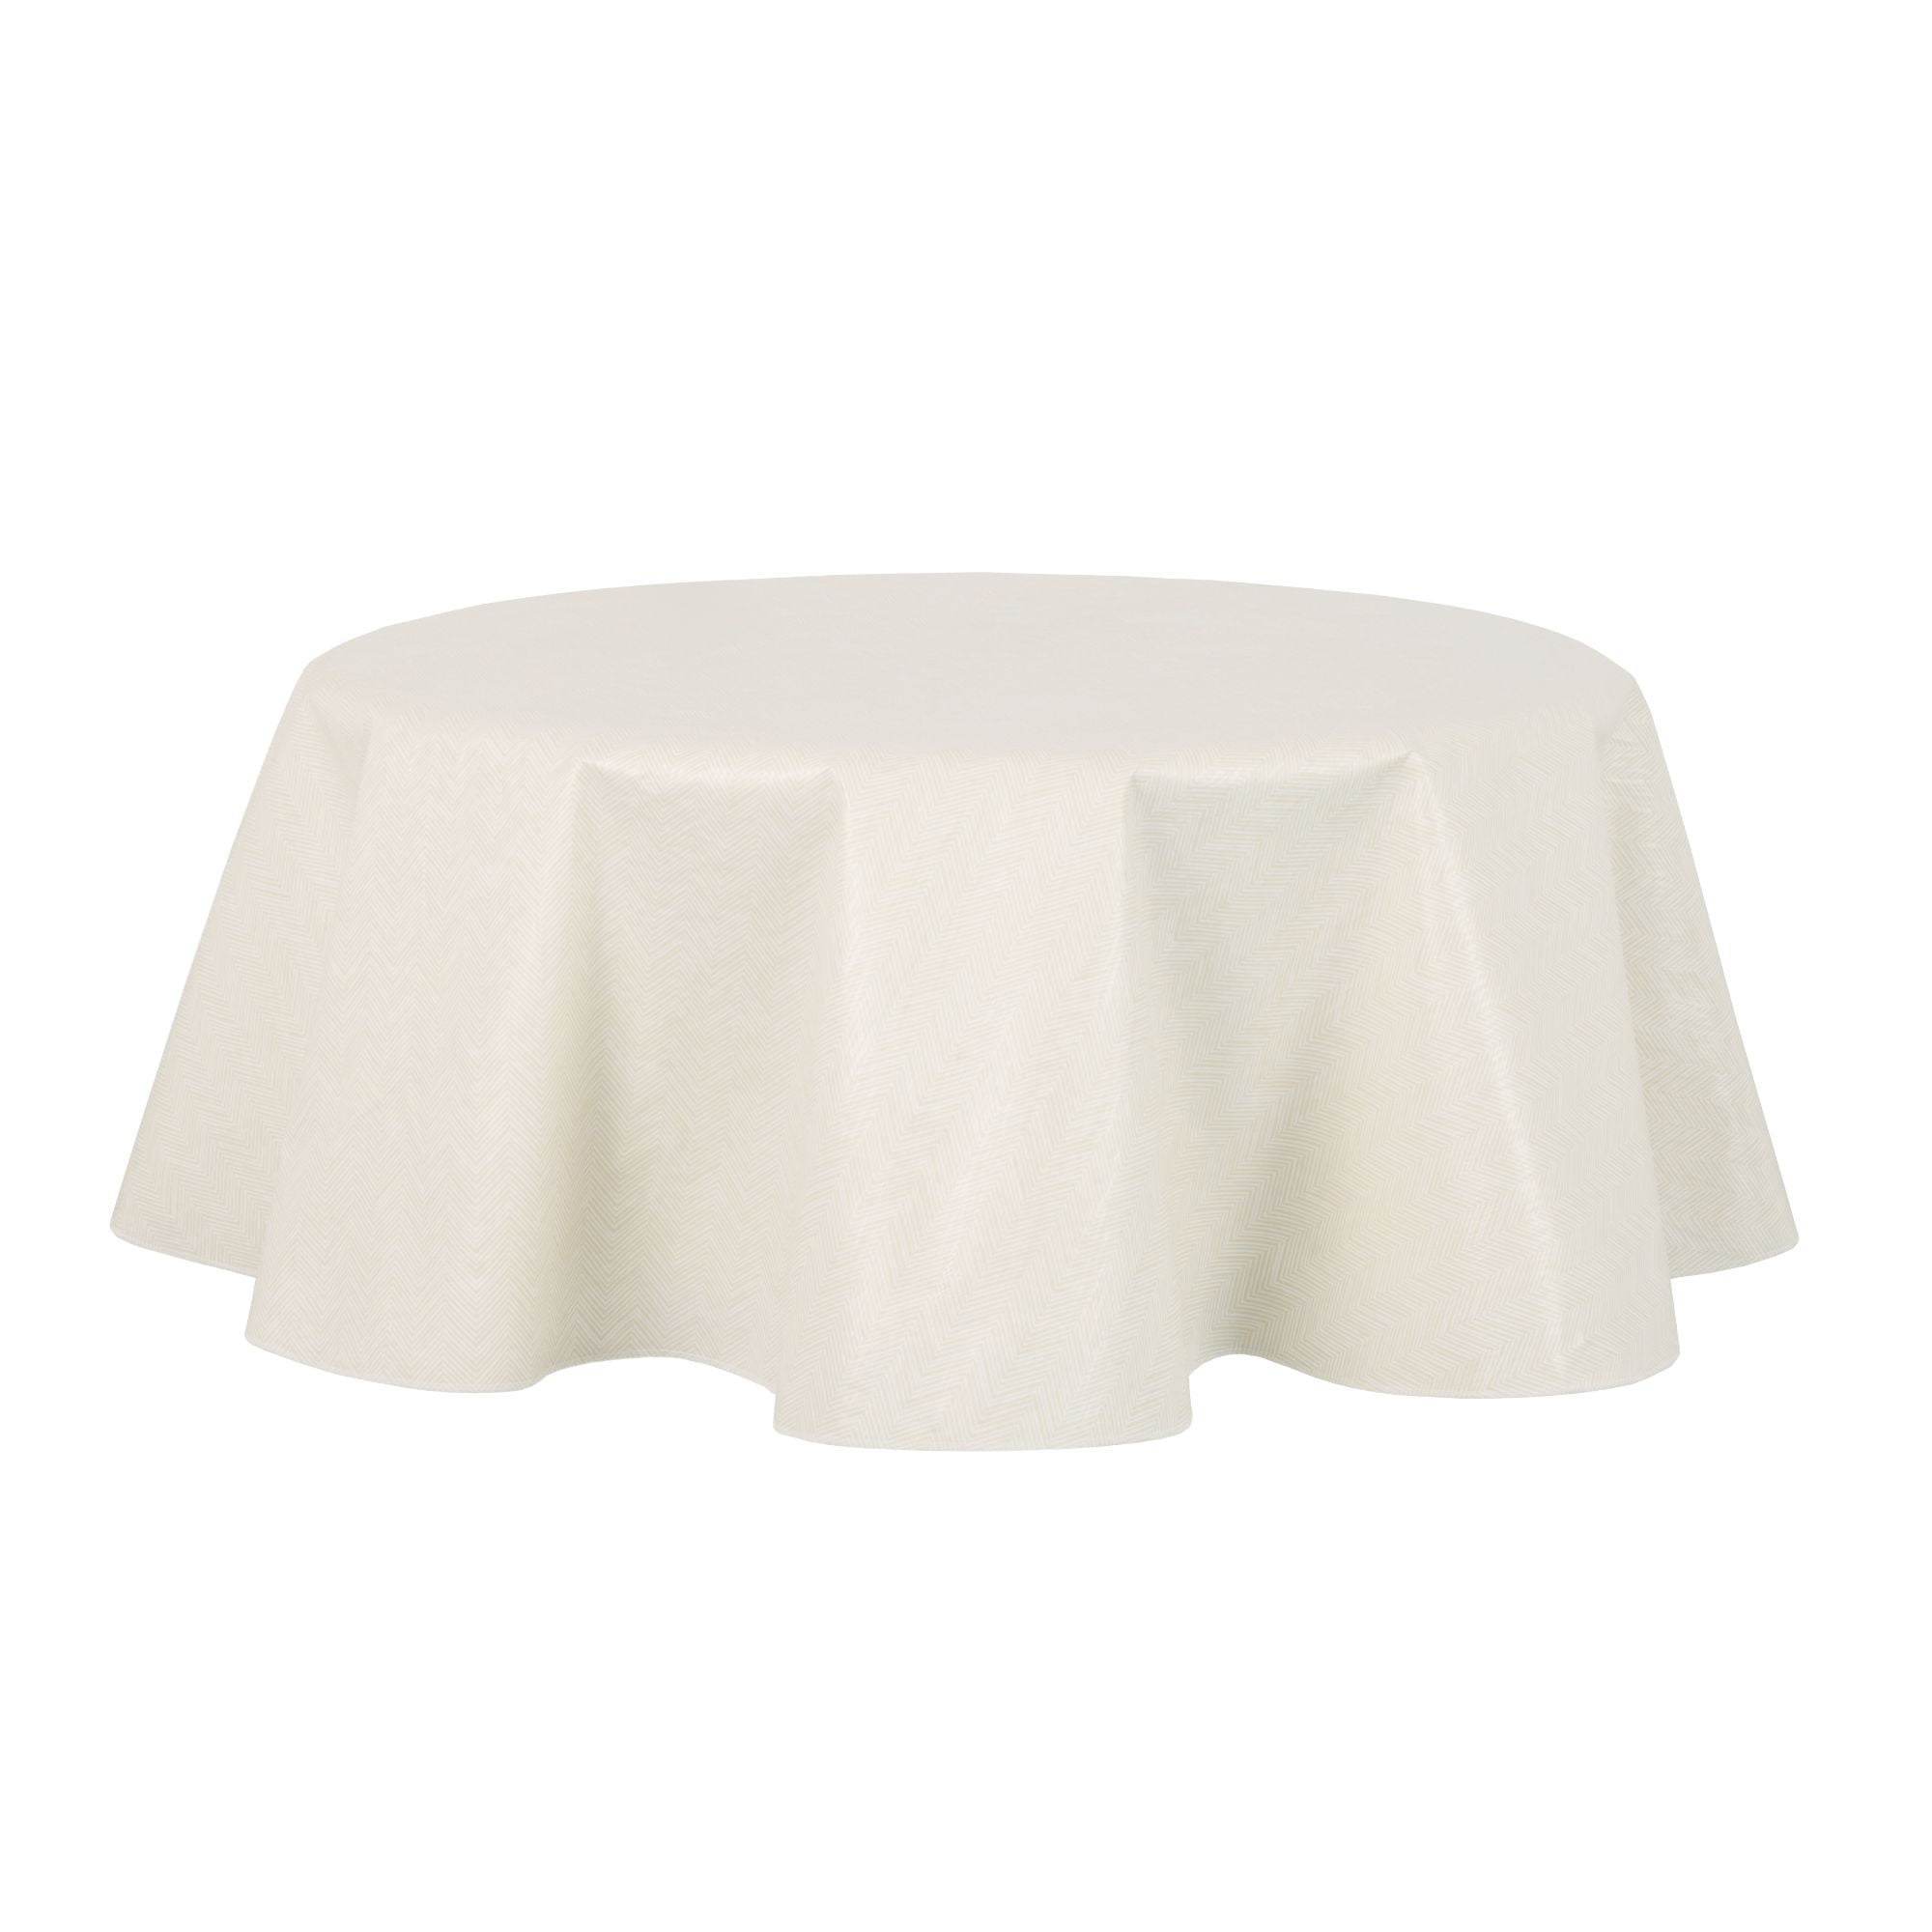 Mainstays Herringbone PEVA Tablecloth, Beige, 70" Round, Available in various sizes and colors